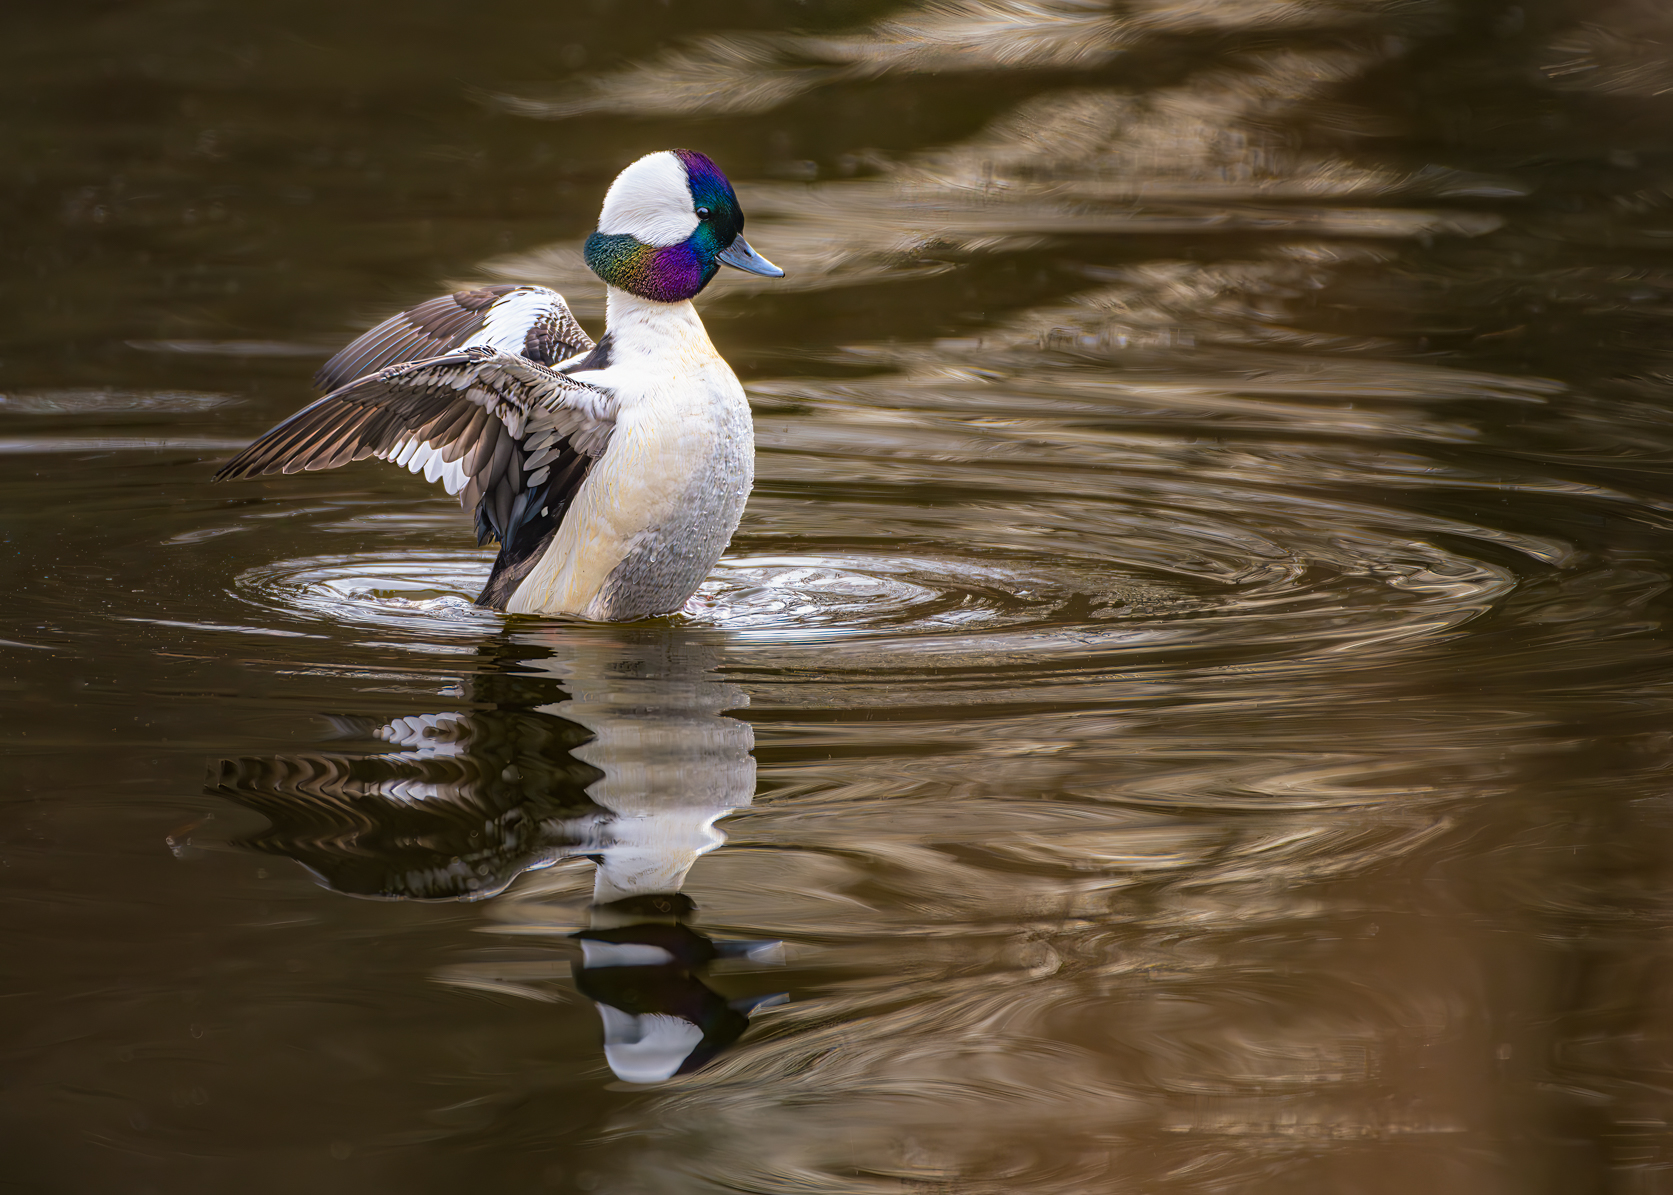 2023-12-24 A YOUNG BUFFLEHEAD DUCK WITH COLORFUL HEAD FEATHERS FLAPPING ITS WINGS WITH A REFLE...jpg